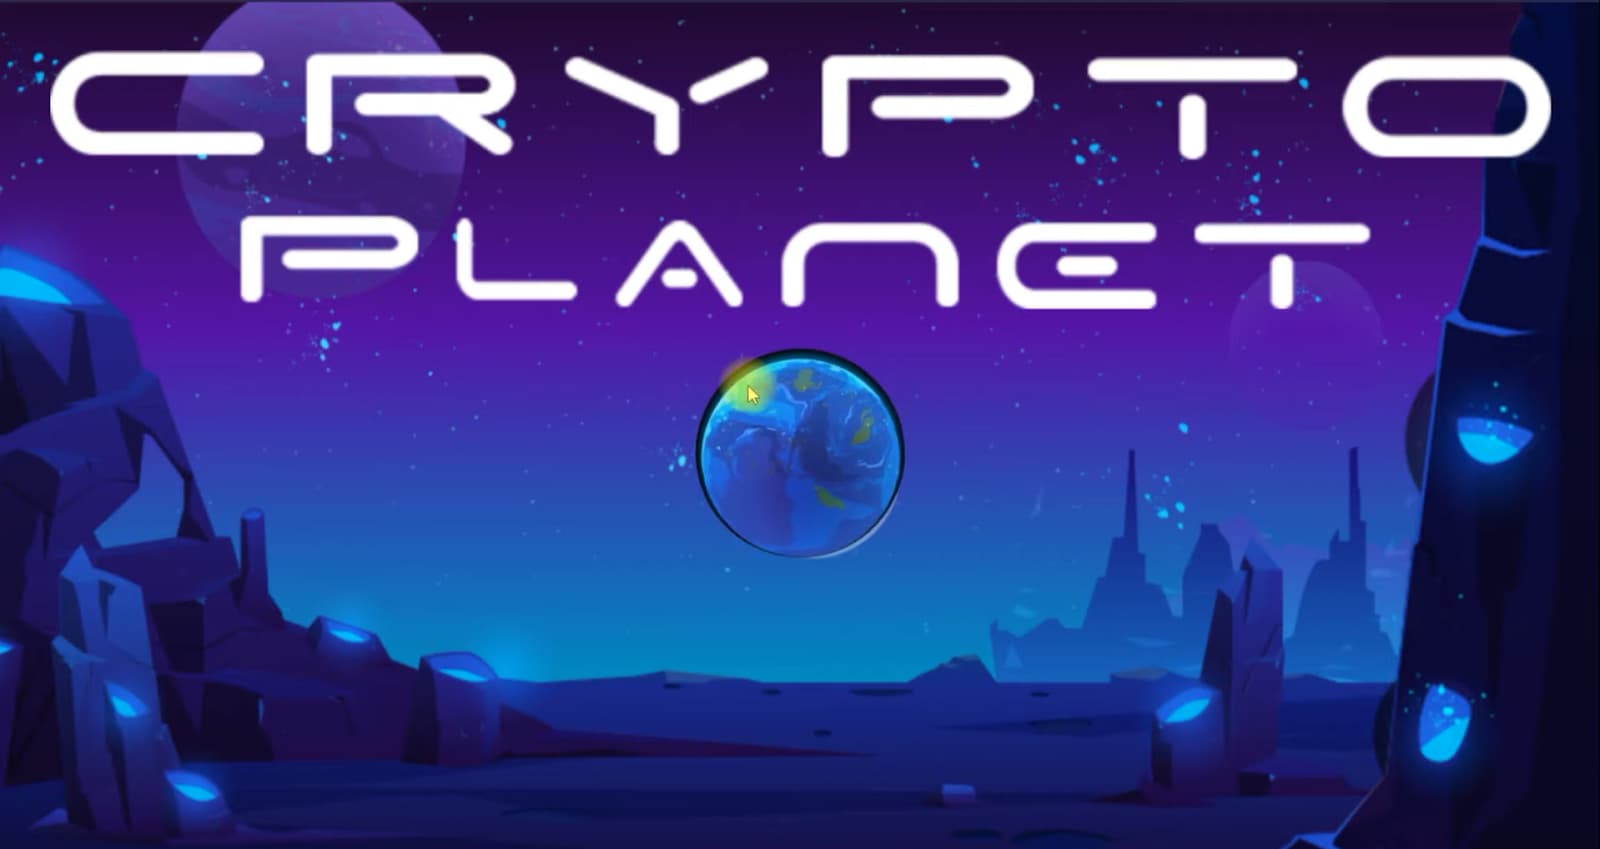 The title screen of 'Crypto Planet' with an Earth-like orb